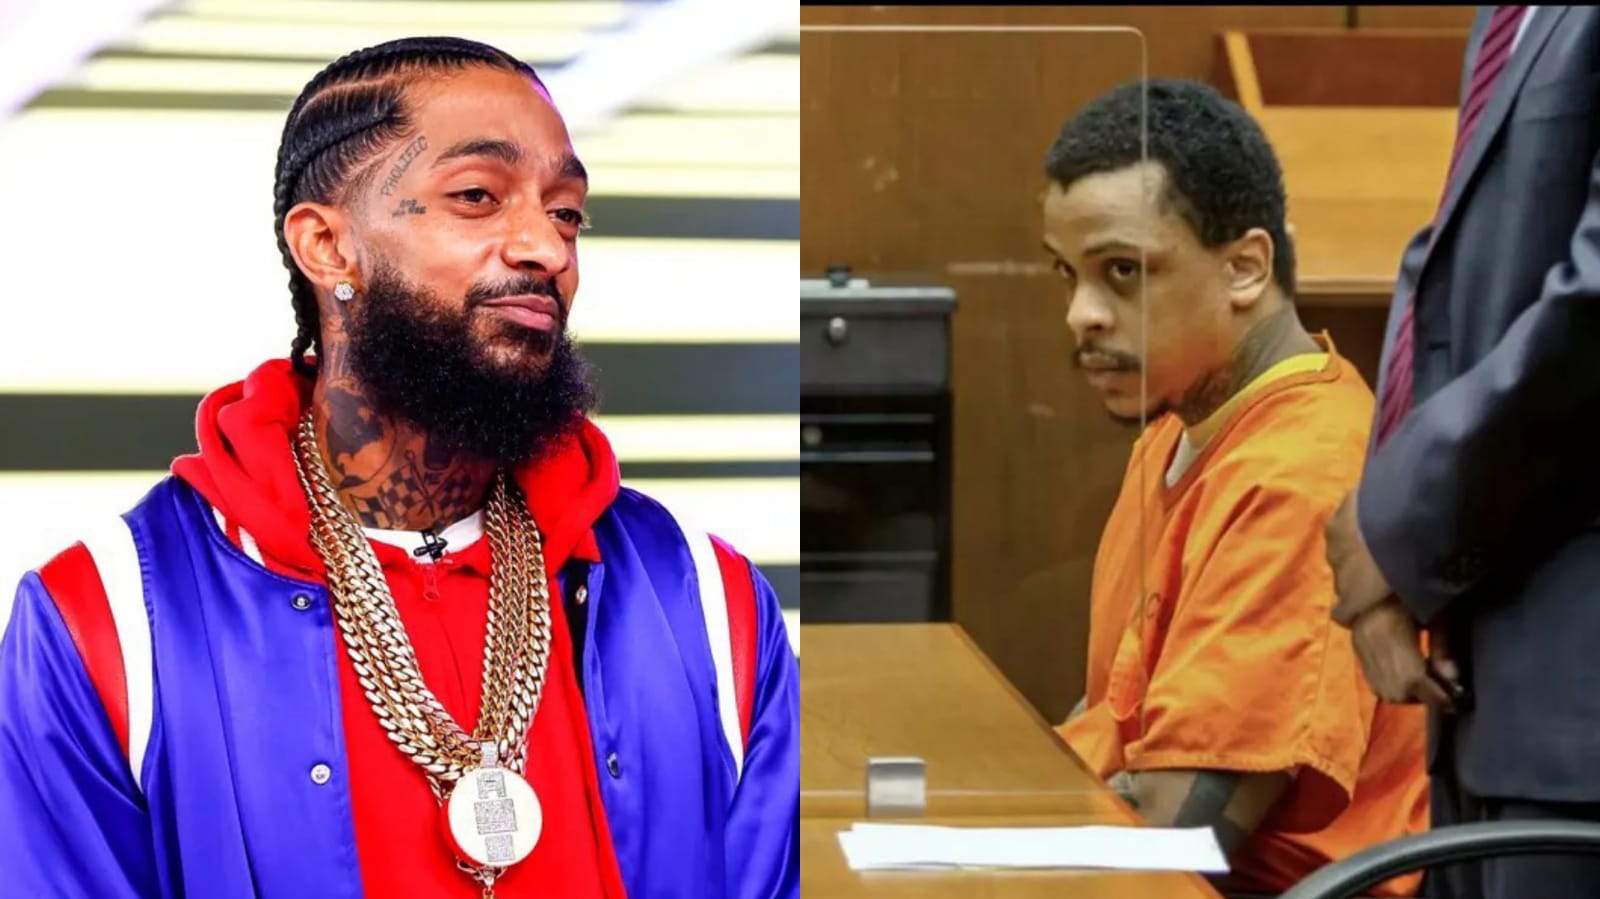 A collage of the late rapper Nipsey Hussle and Eric Holder Jr